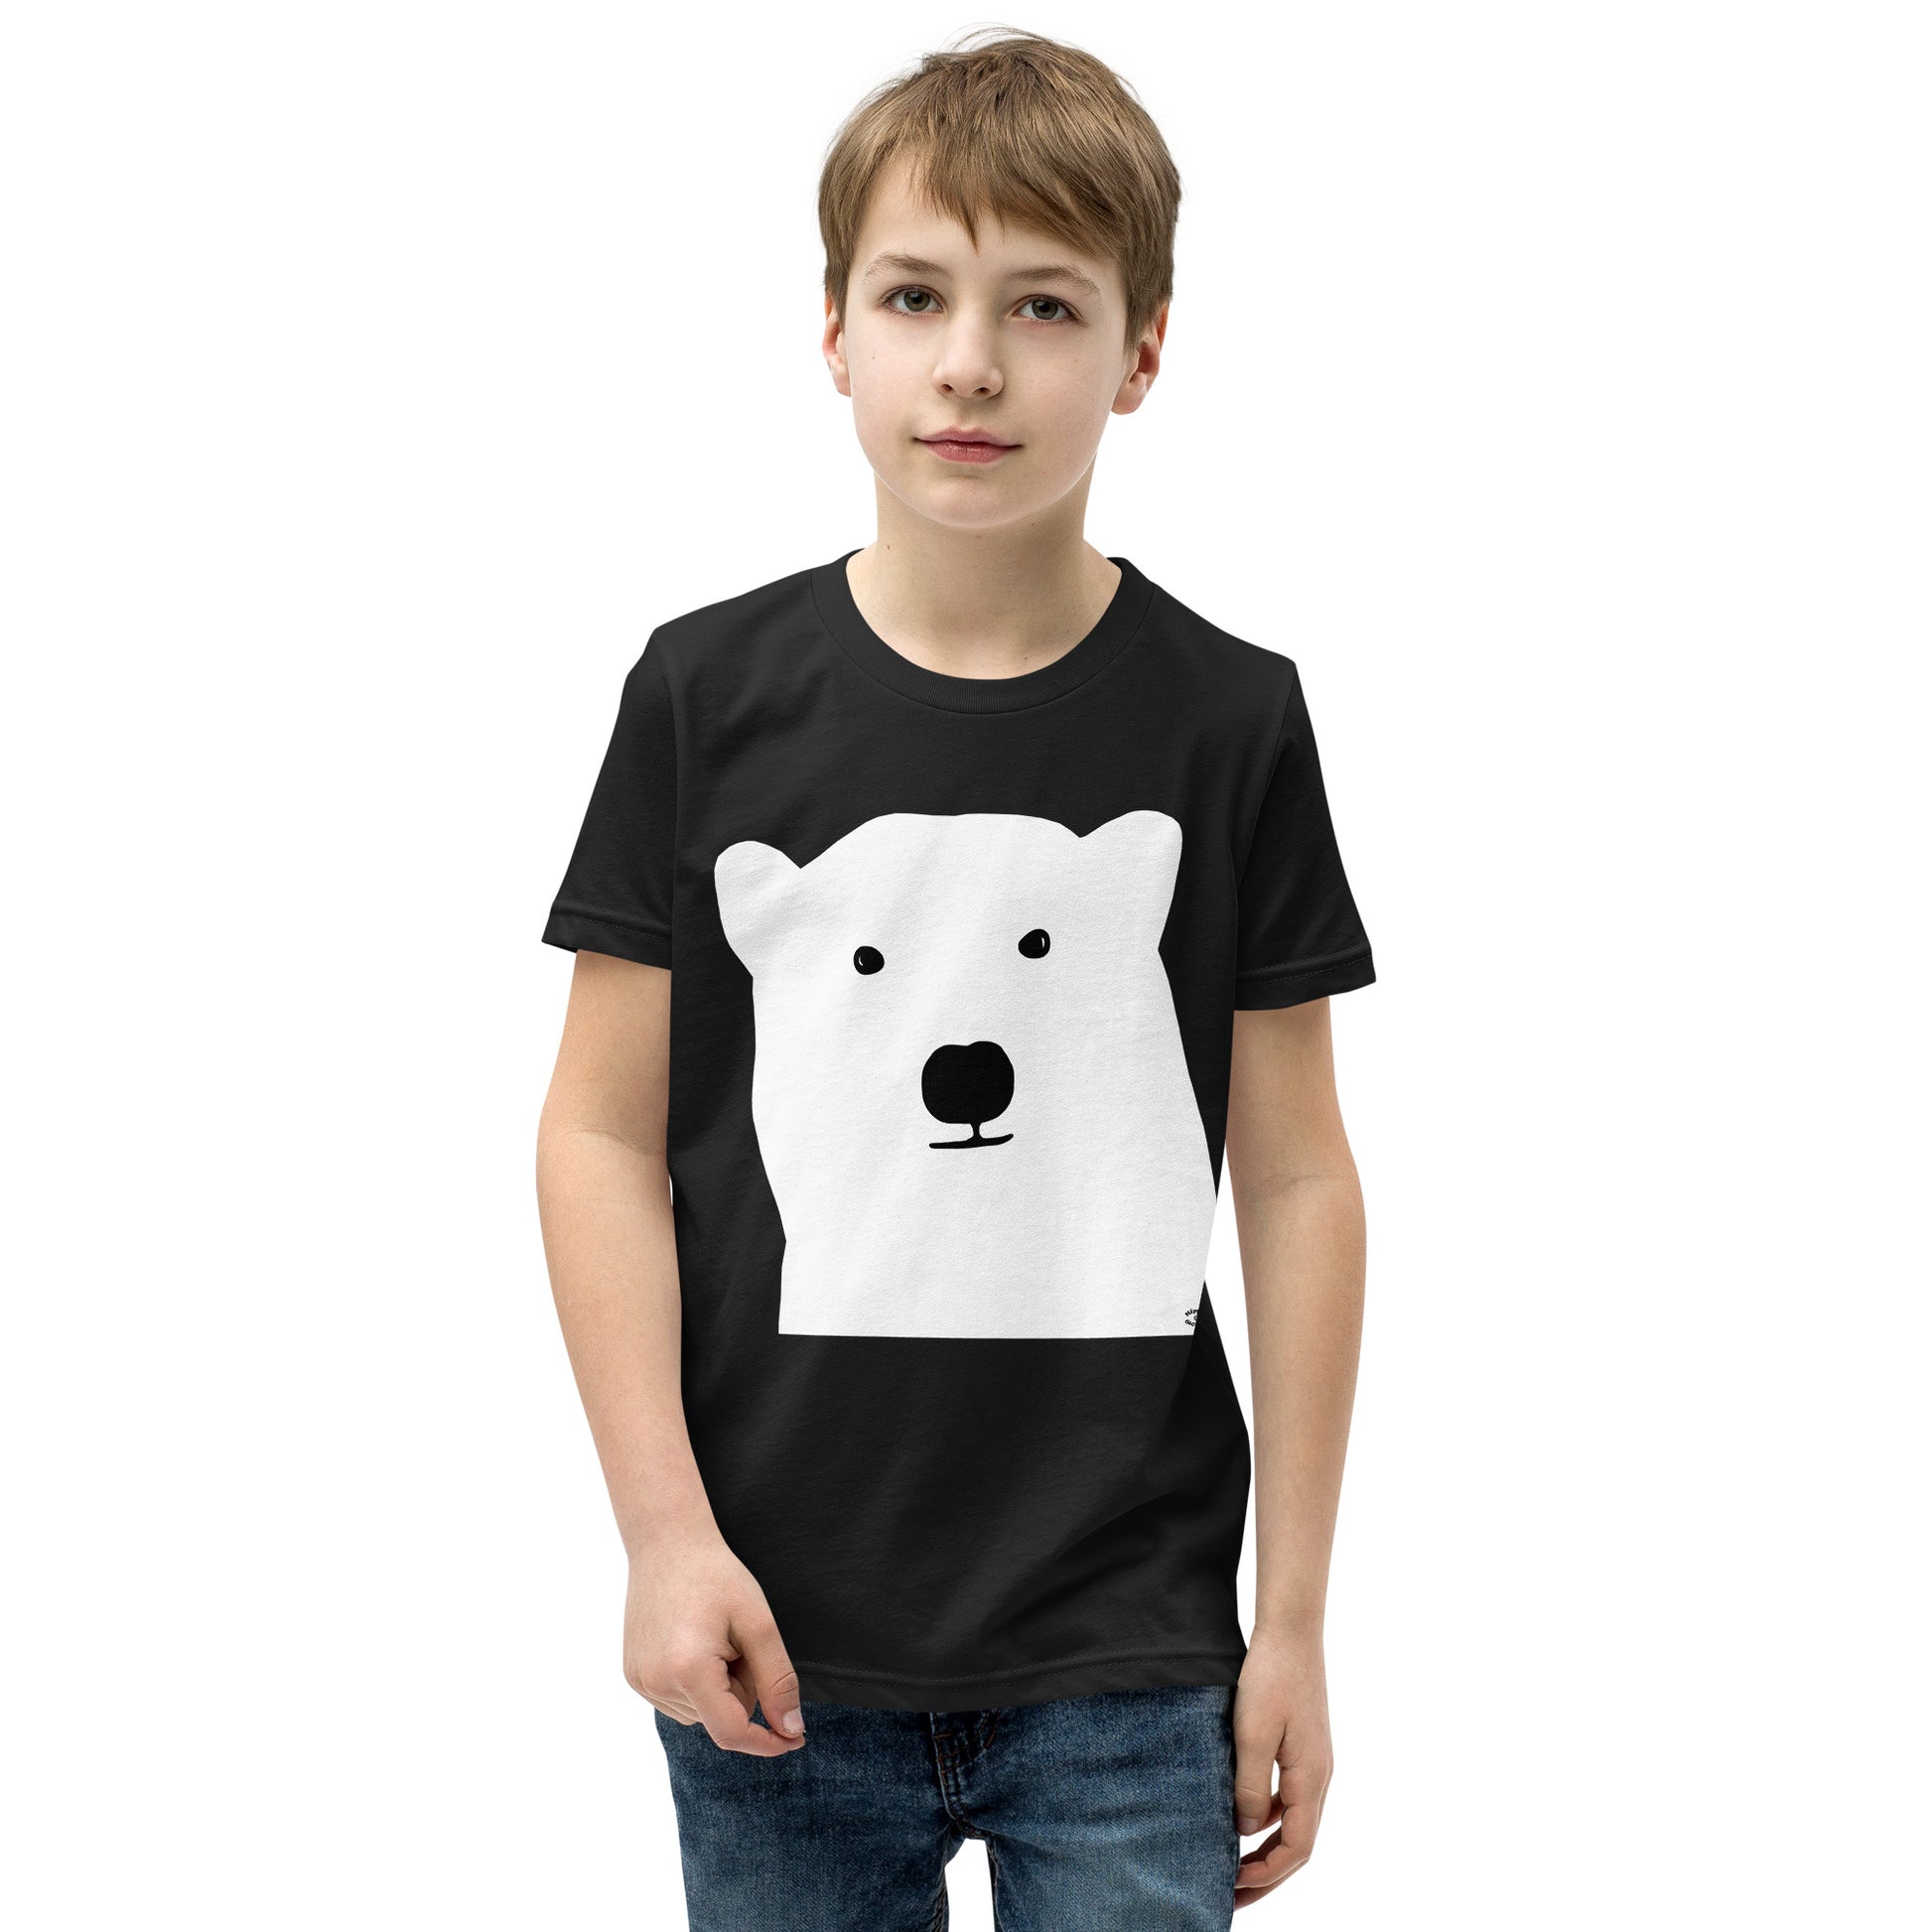 A picture of a young boy wearing a short sleeve tshirt with a kool polar bear face on the front-black-front